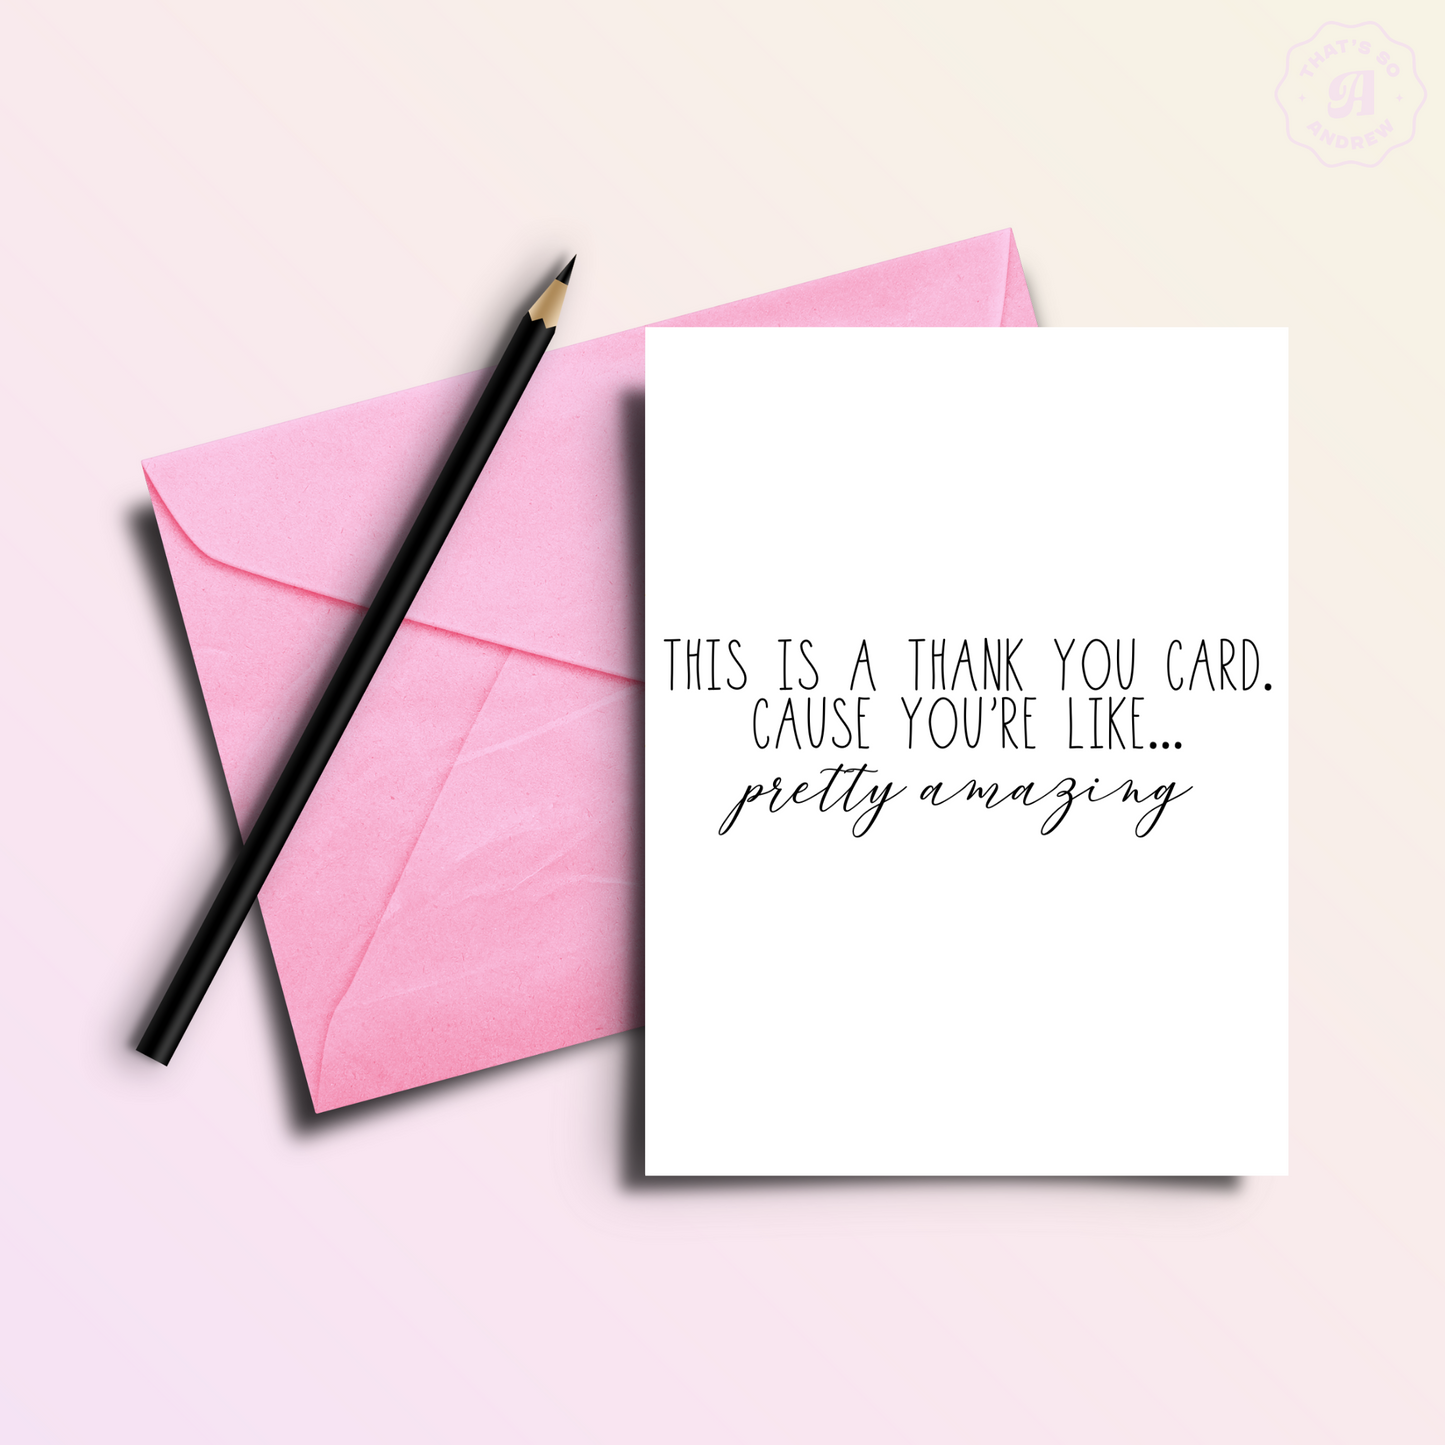 This is a Thank You Card Cause You're Amazing Card